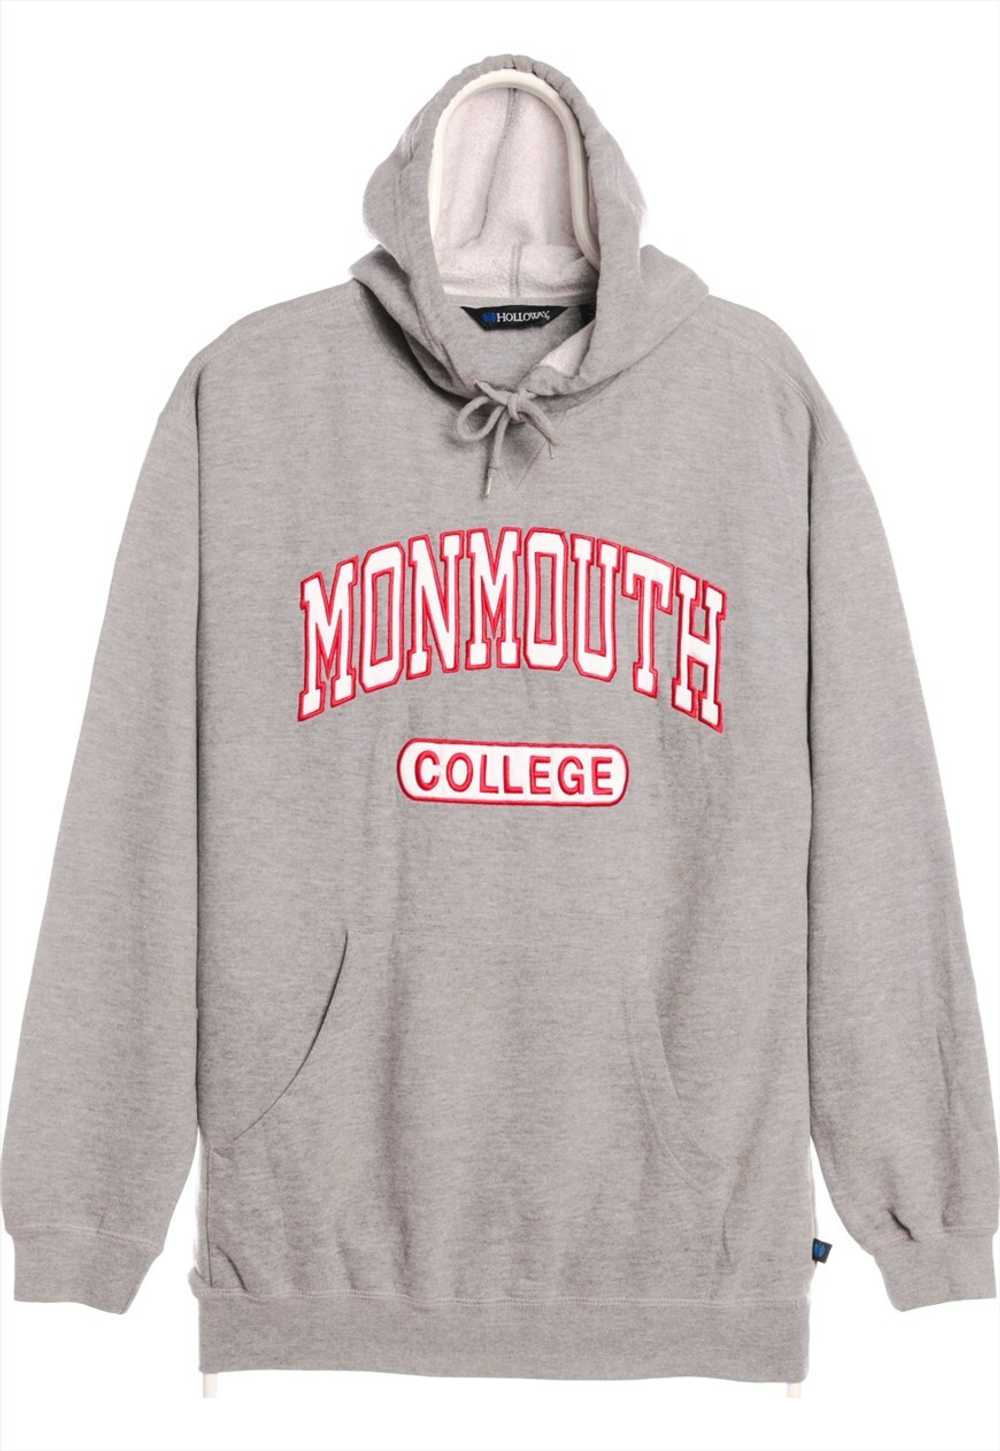 Vintage 90's Holloway Hoodie Embroidered College - image 1